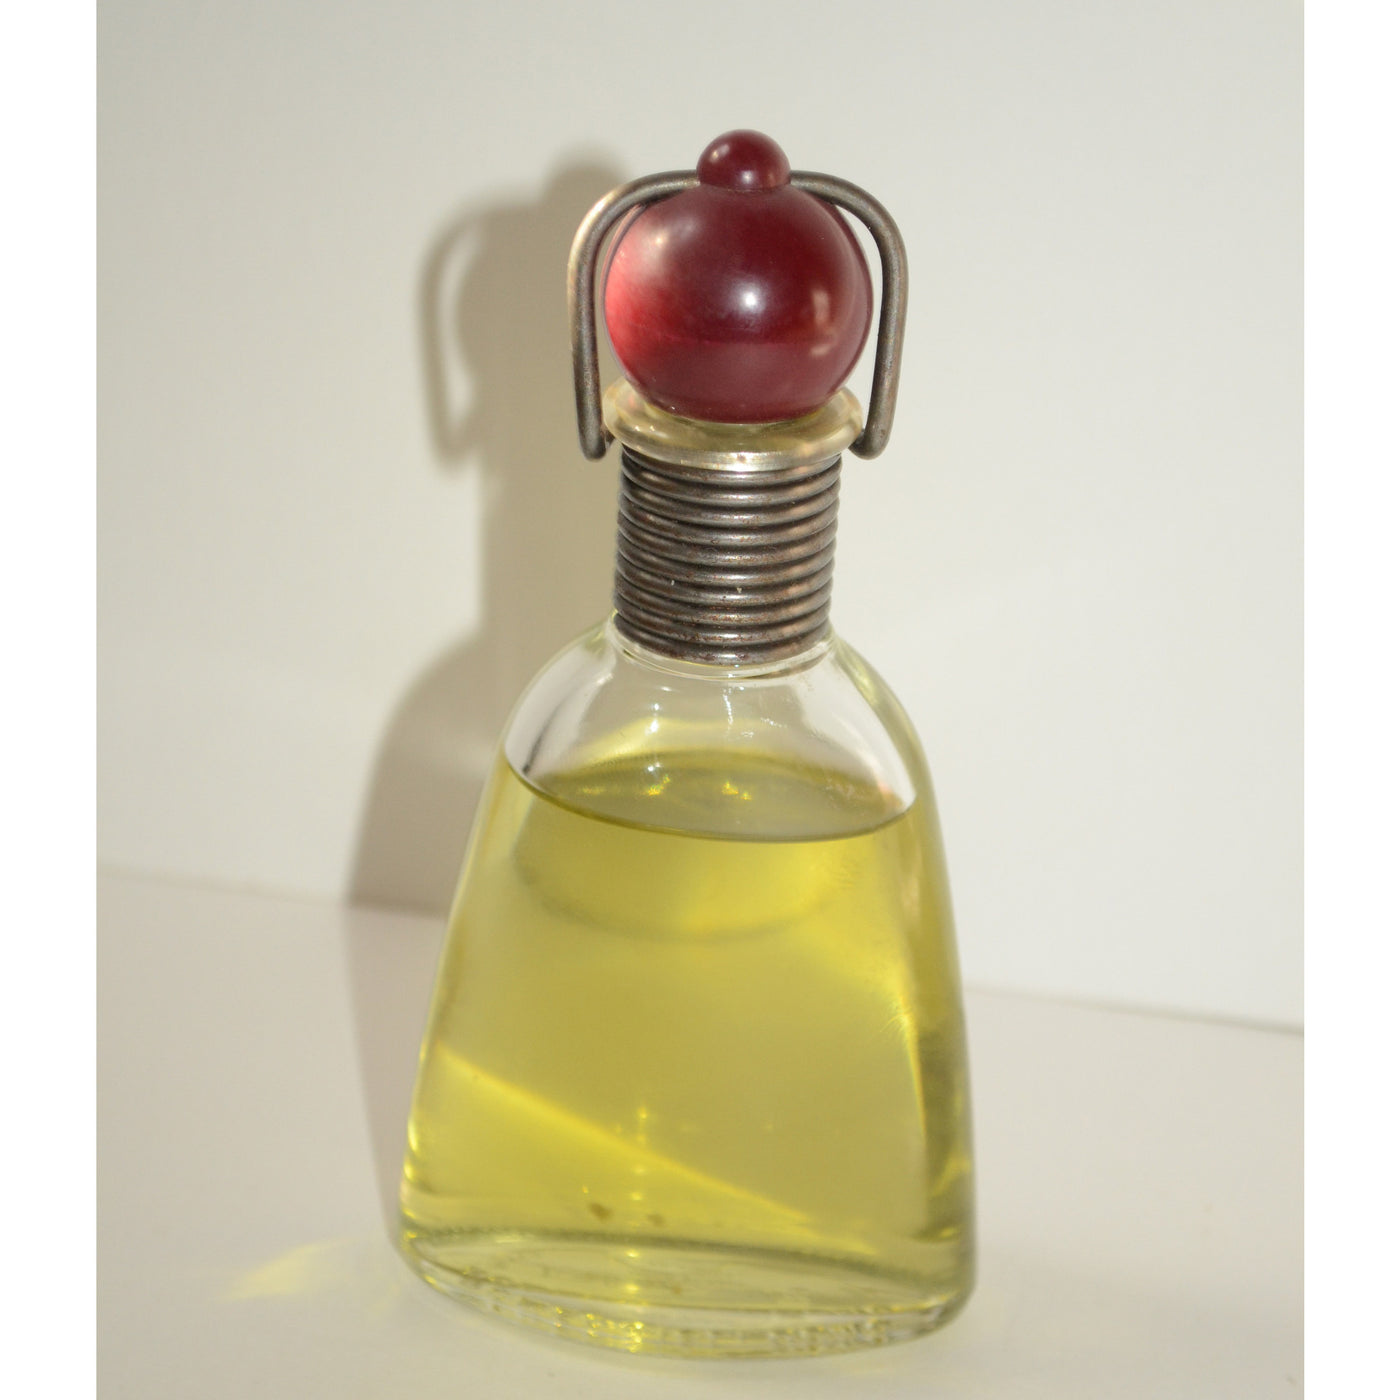 Vintage Romeo Gigli After Shave By H. Alpert